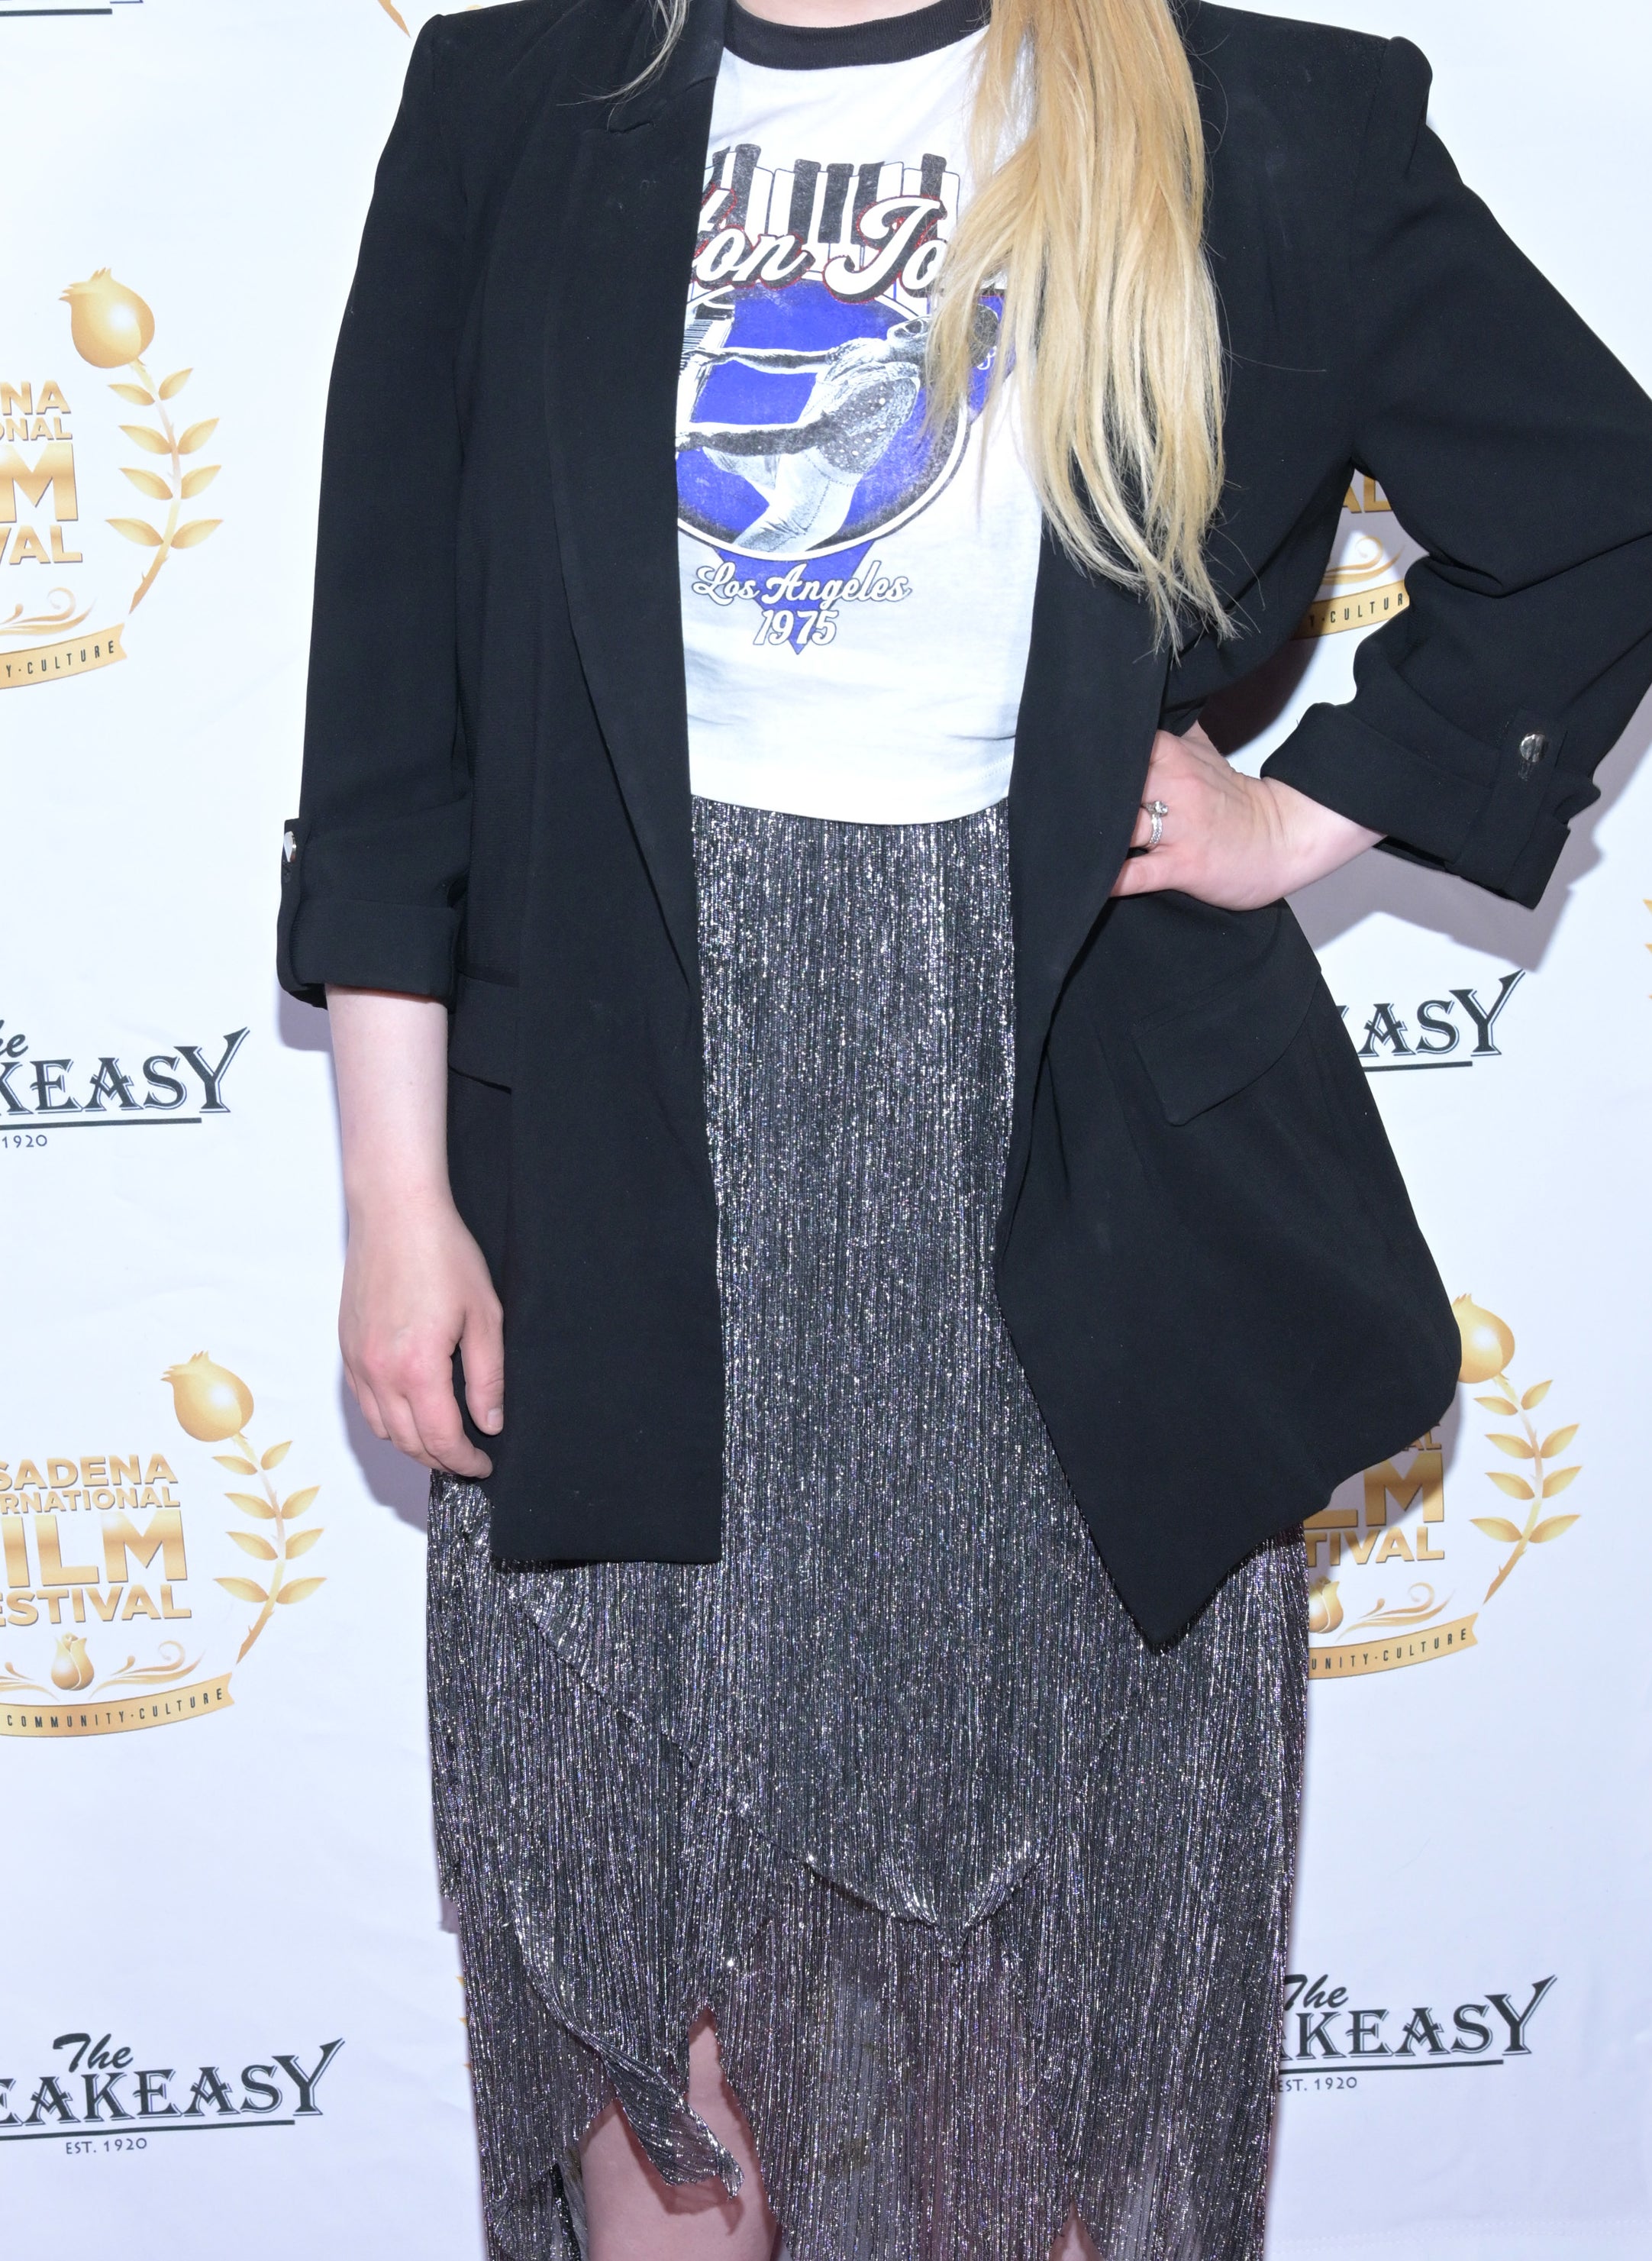 Abigail in a long suit jacket and graphic T-shirt